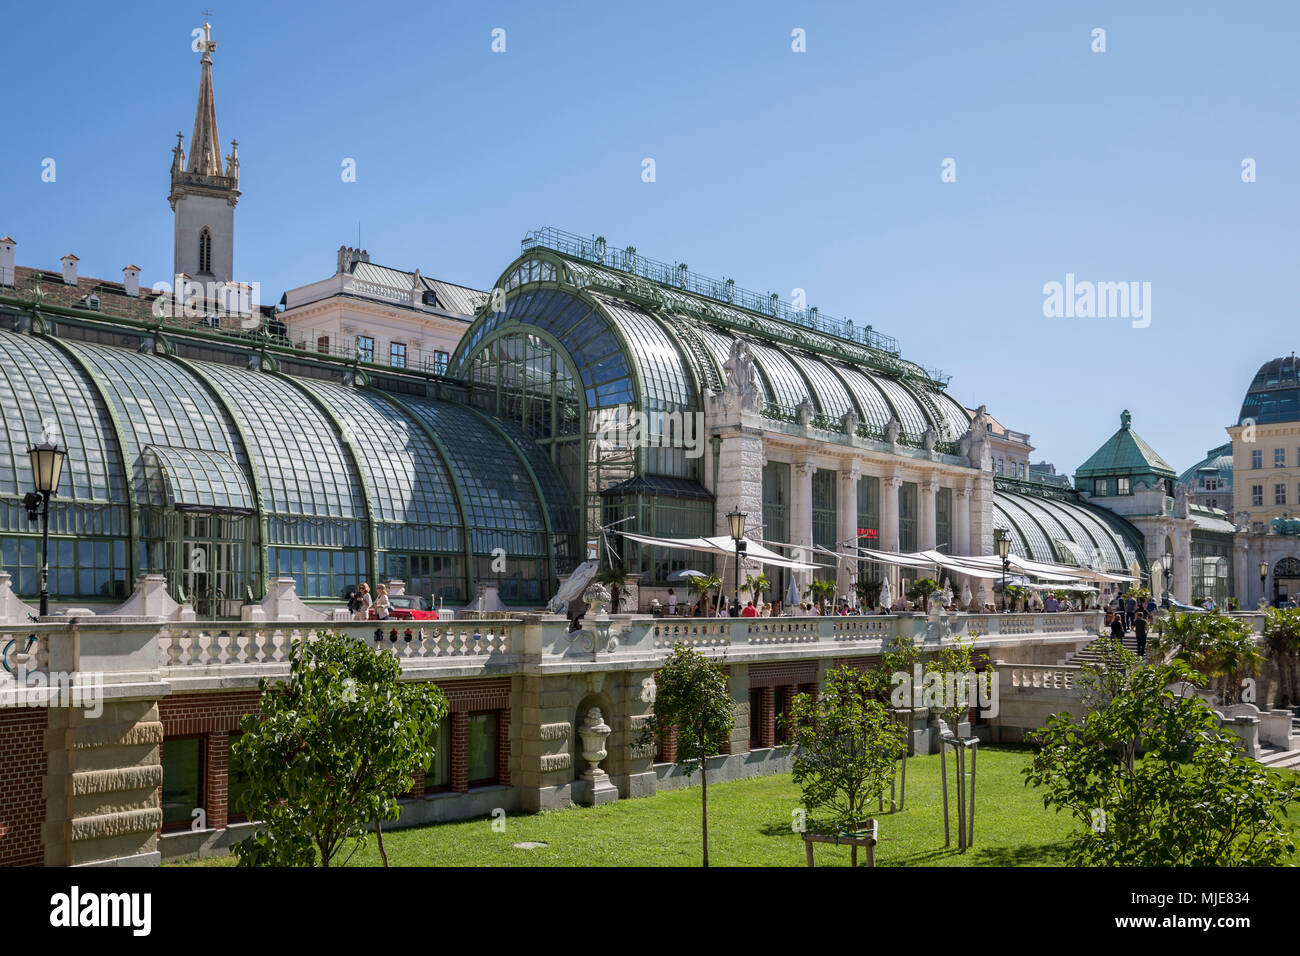 The Palmenhaus in the castle garden, partly used by a food service, Vienna, Innere Stadt, Austria Stock Photo